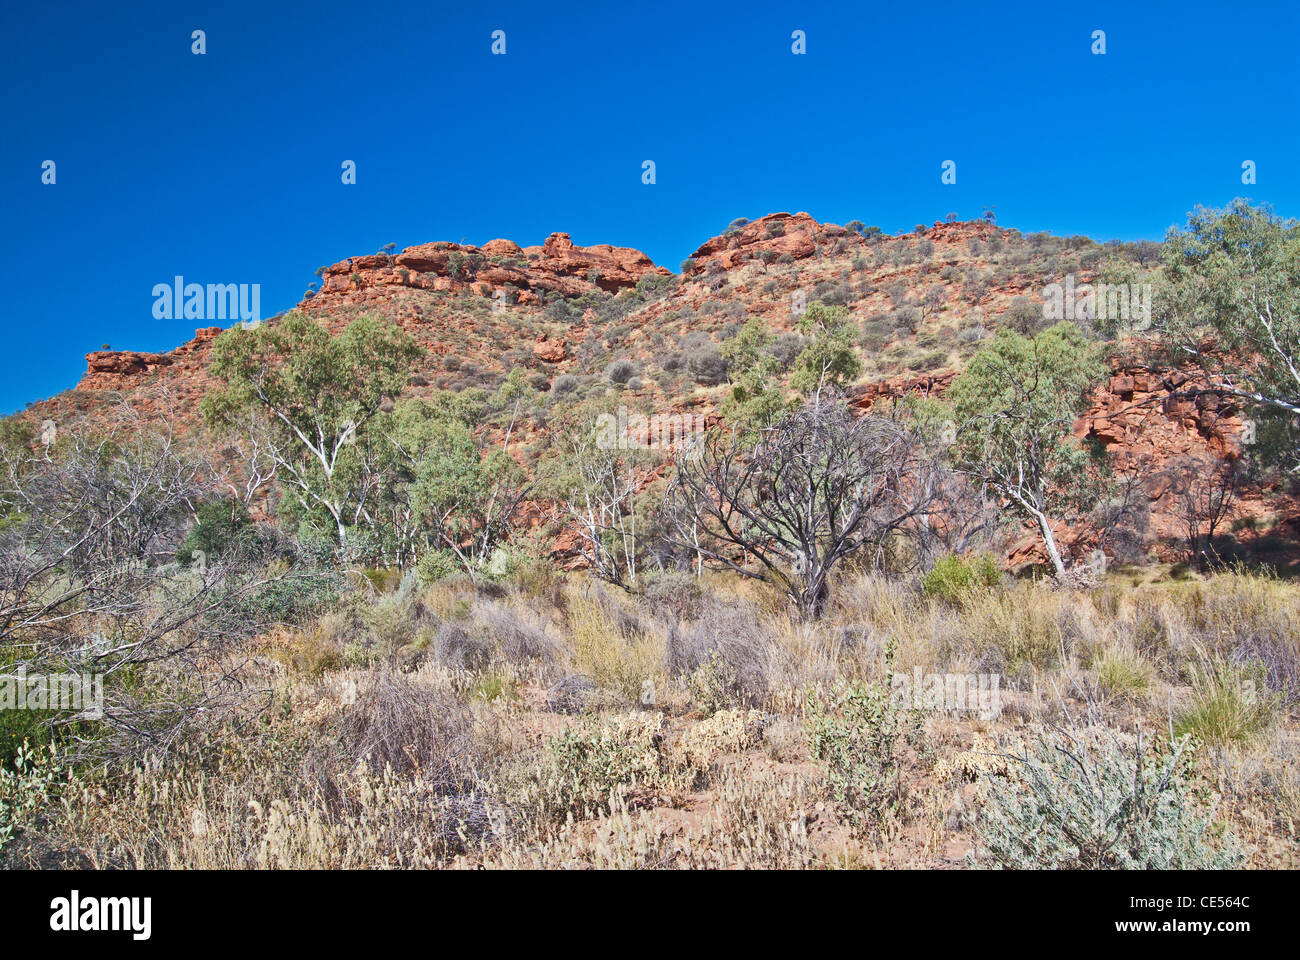 KINGS CANYON, WATARRKA NATIONAL PARK, NORTHERN TERRITORY, NT, AUSTRALIEN, OUTBACK Stockfoto